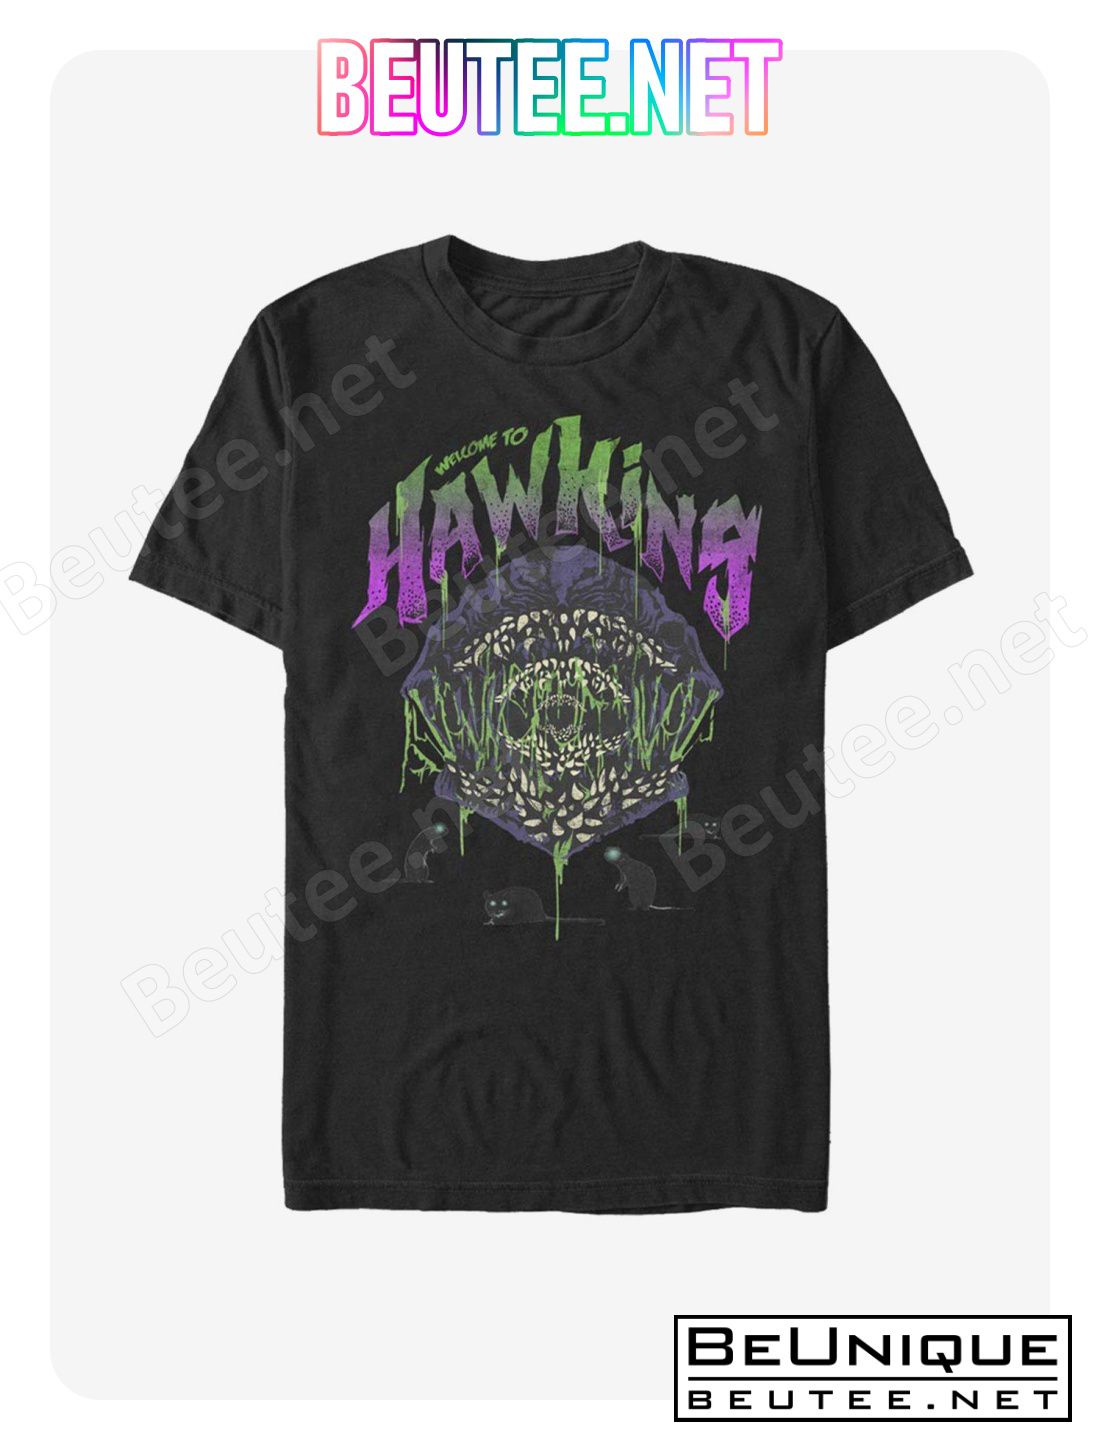 Stranger Things Welcome To Hawkins T-Shirt